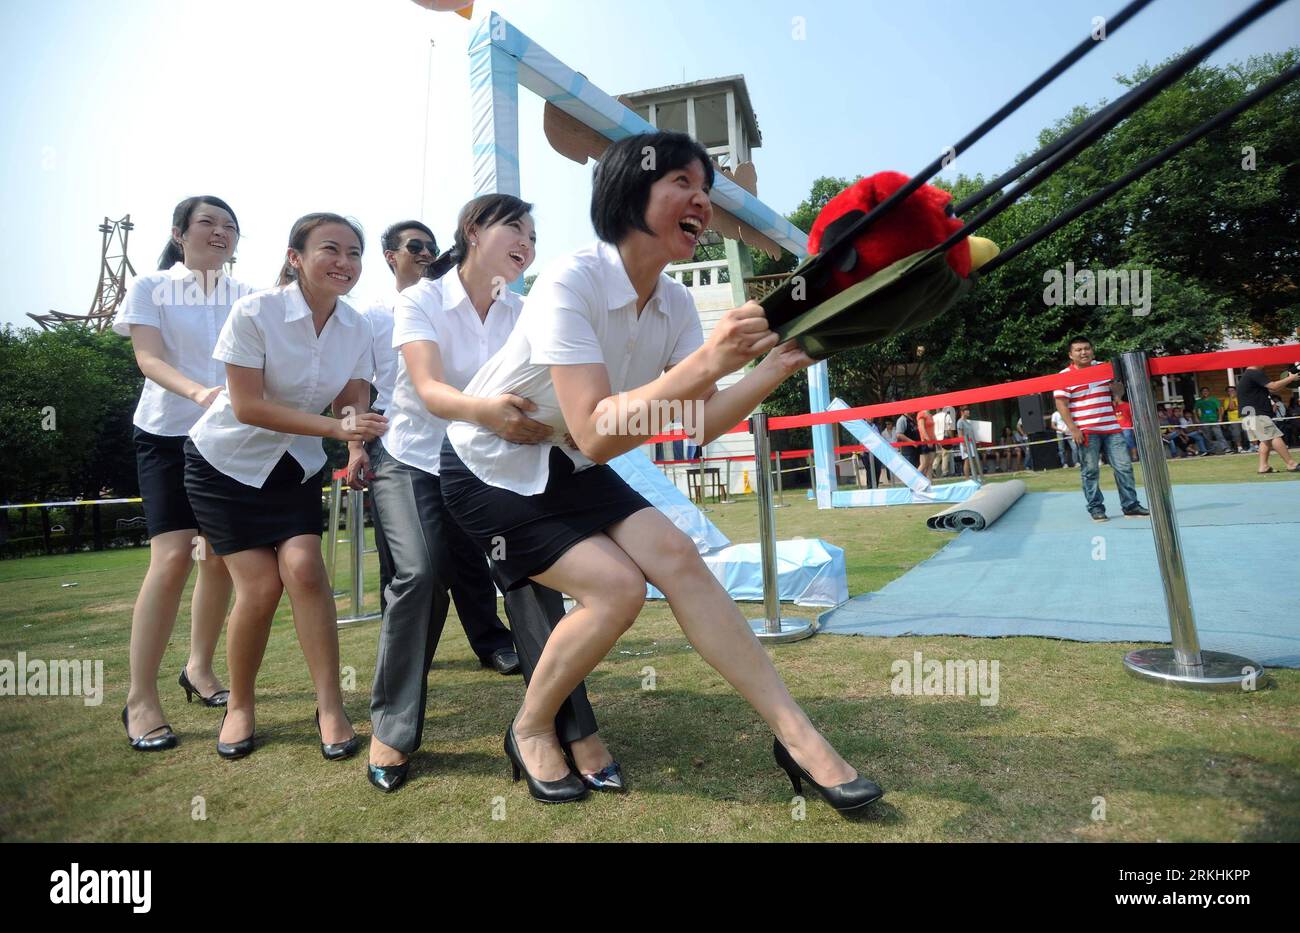 Bildnummer: 55855758  Datum: 30.08.2011  Copyright: imago/Xinhua (110830) -- CHANGSHA, Aug. 30, 2011 (Xinhua) -- Players prepare to shoot out an angry bird during a real life angry bird game in a theme park in Changsha, capital of central China s Hunan Province, Aug. 30, 2011. Angry birds, balloon pigs, huge slingshot and castles made of toy bricks were set up here for the real life angry bird game recently. (Xinhua/Li Ga) (zn) CHINA-HUNAN-CHANGSHA-REAL LIFE GAME-ANGRY BIRD (CN) PUBLICATIONxNOTxINxCHN Gesellschaft Kultur Freizeitpark Spiel kurios Komik Computerspiel live real xda 2011 quer Auf Stock Photo